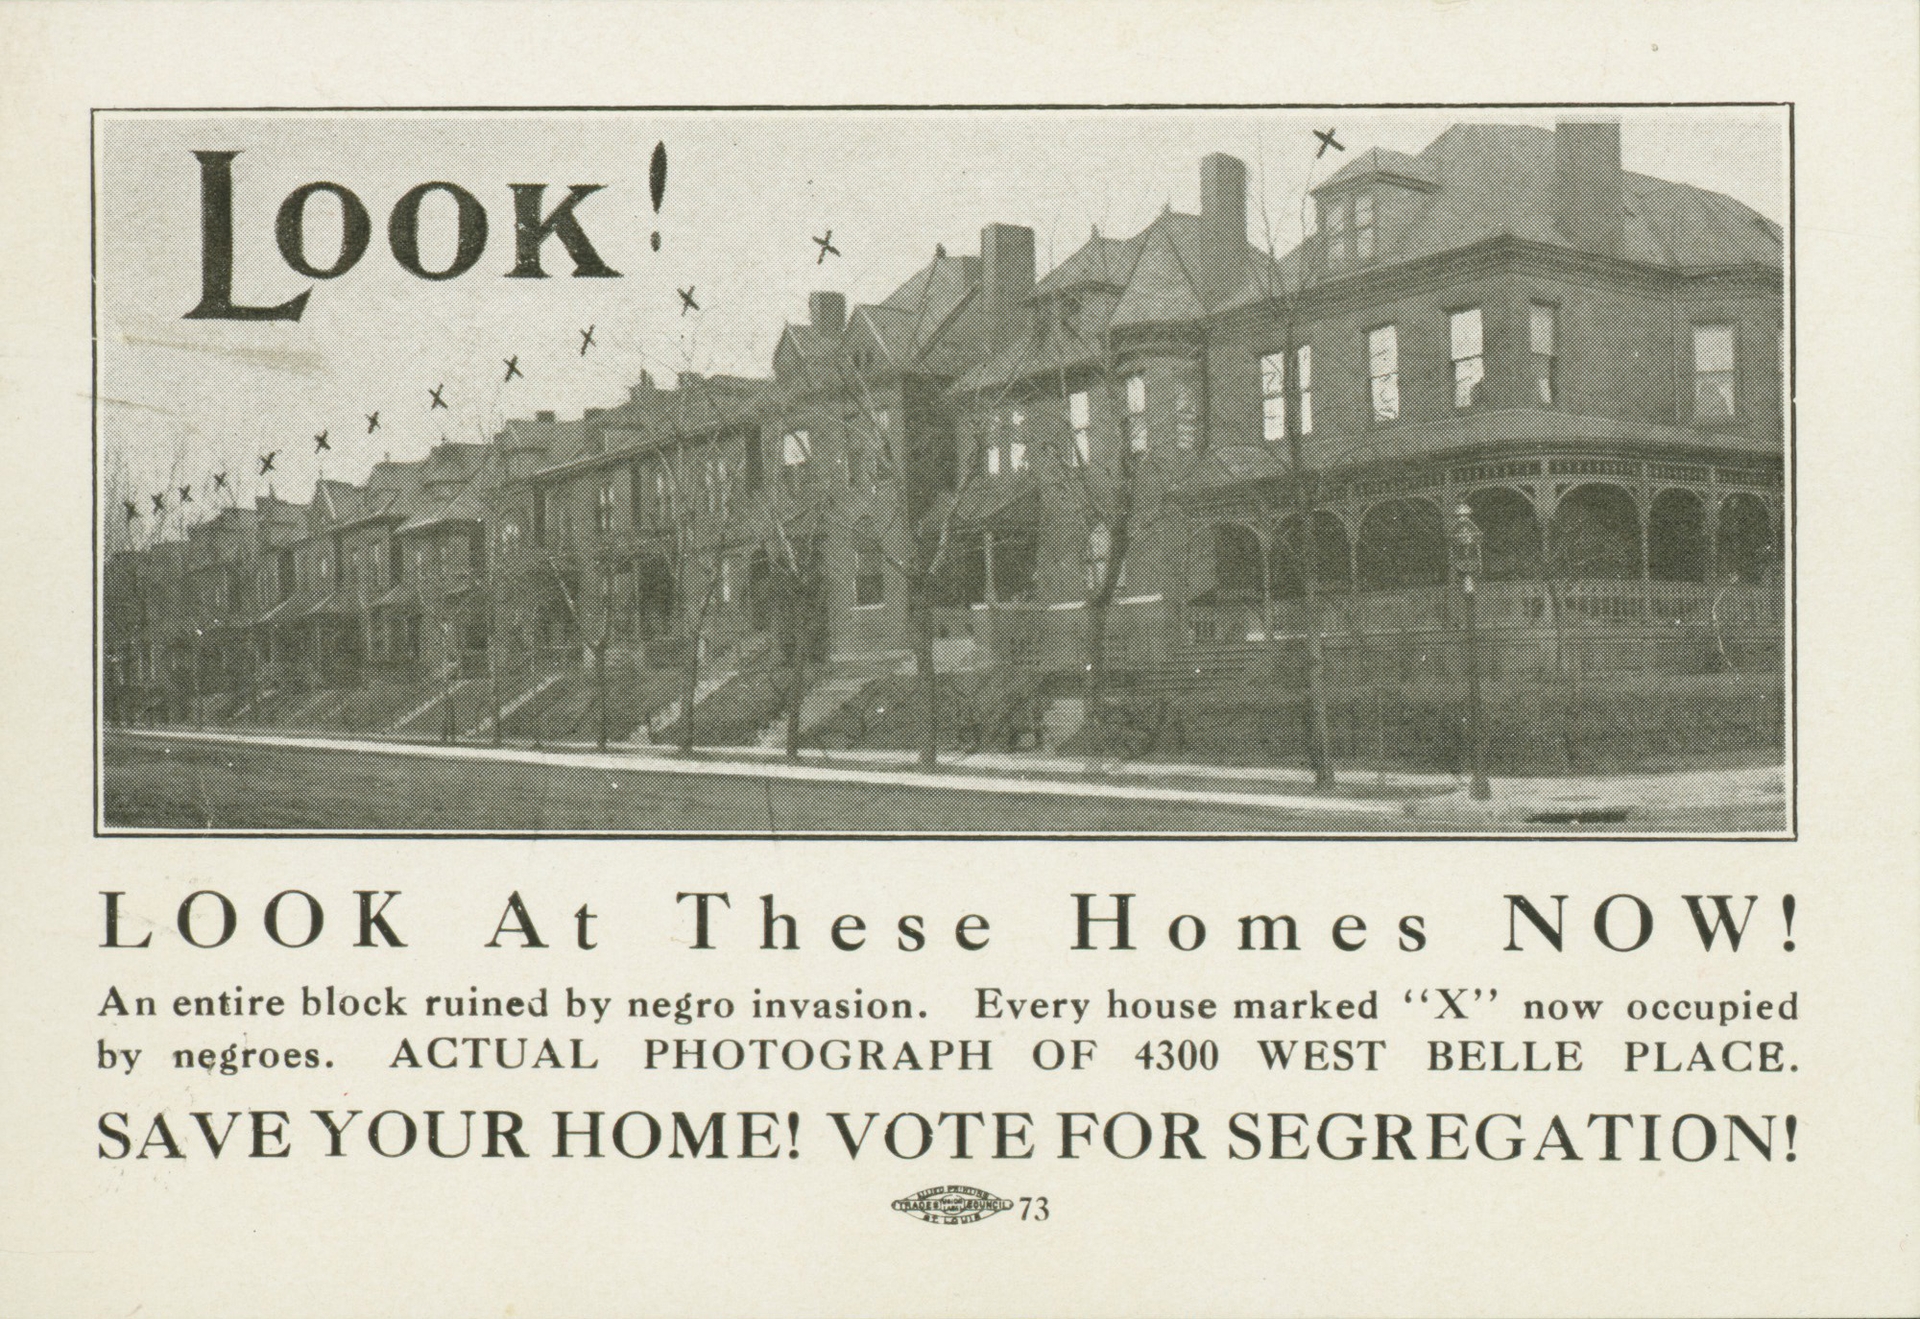 A 1916 postcard from the United Welfare Association warning of "invasion" and asking recipients to vote for segregation to save their homes.